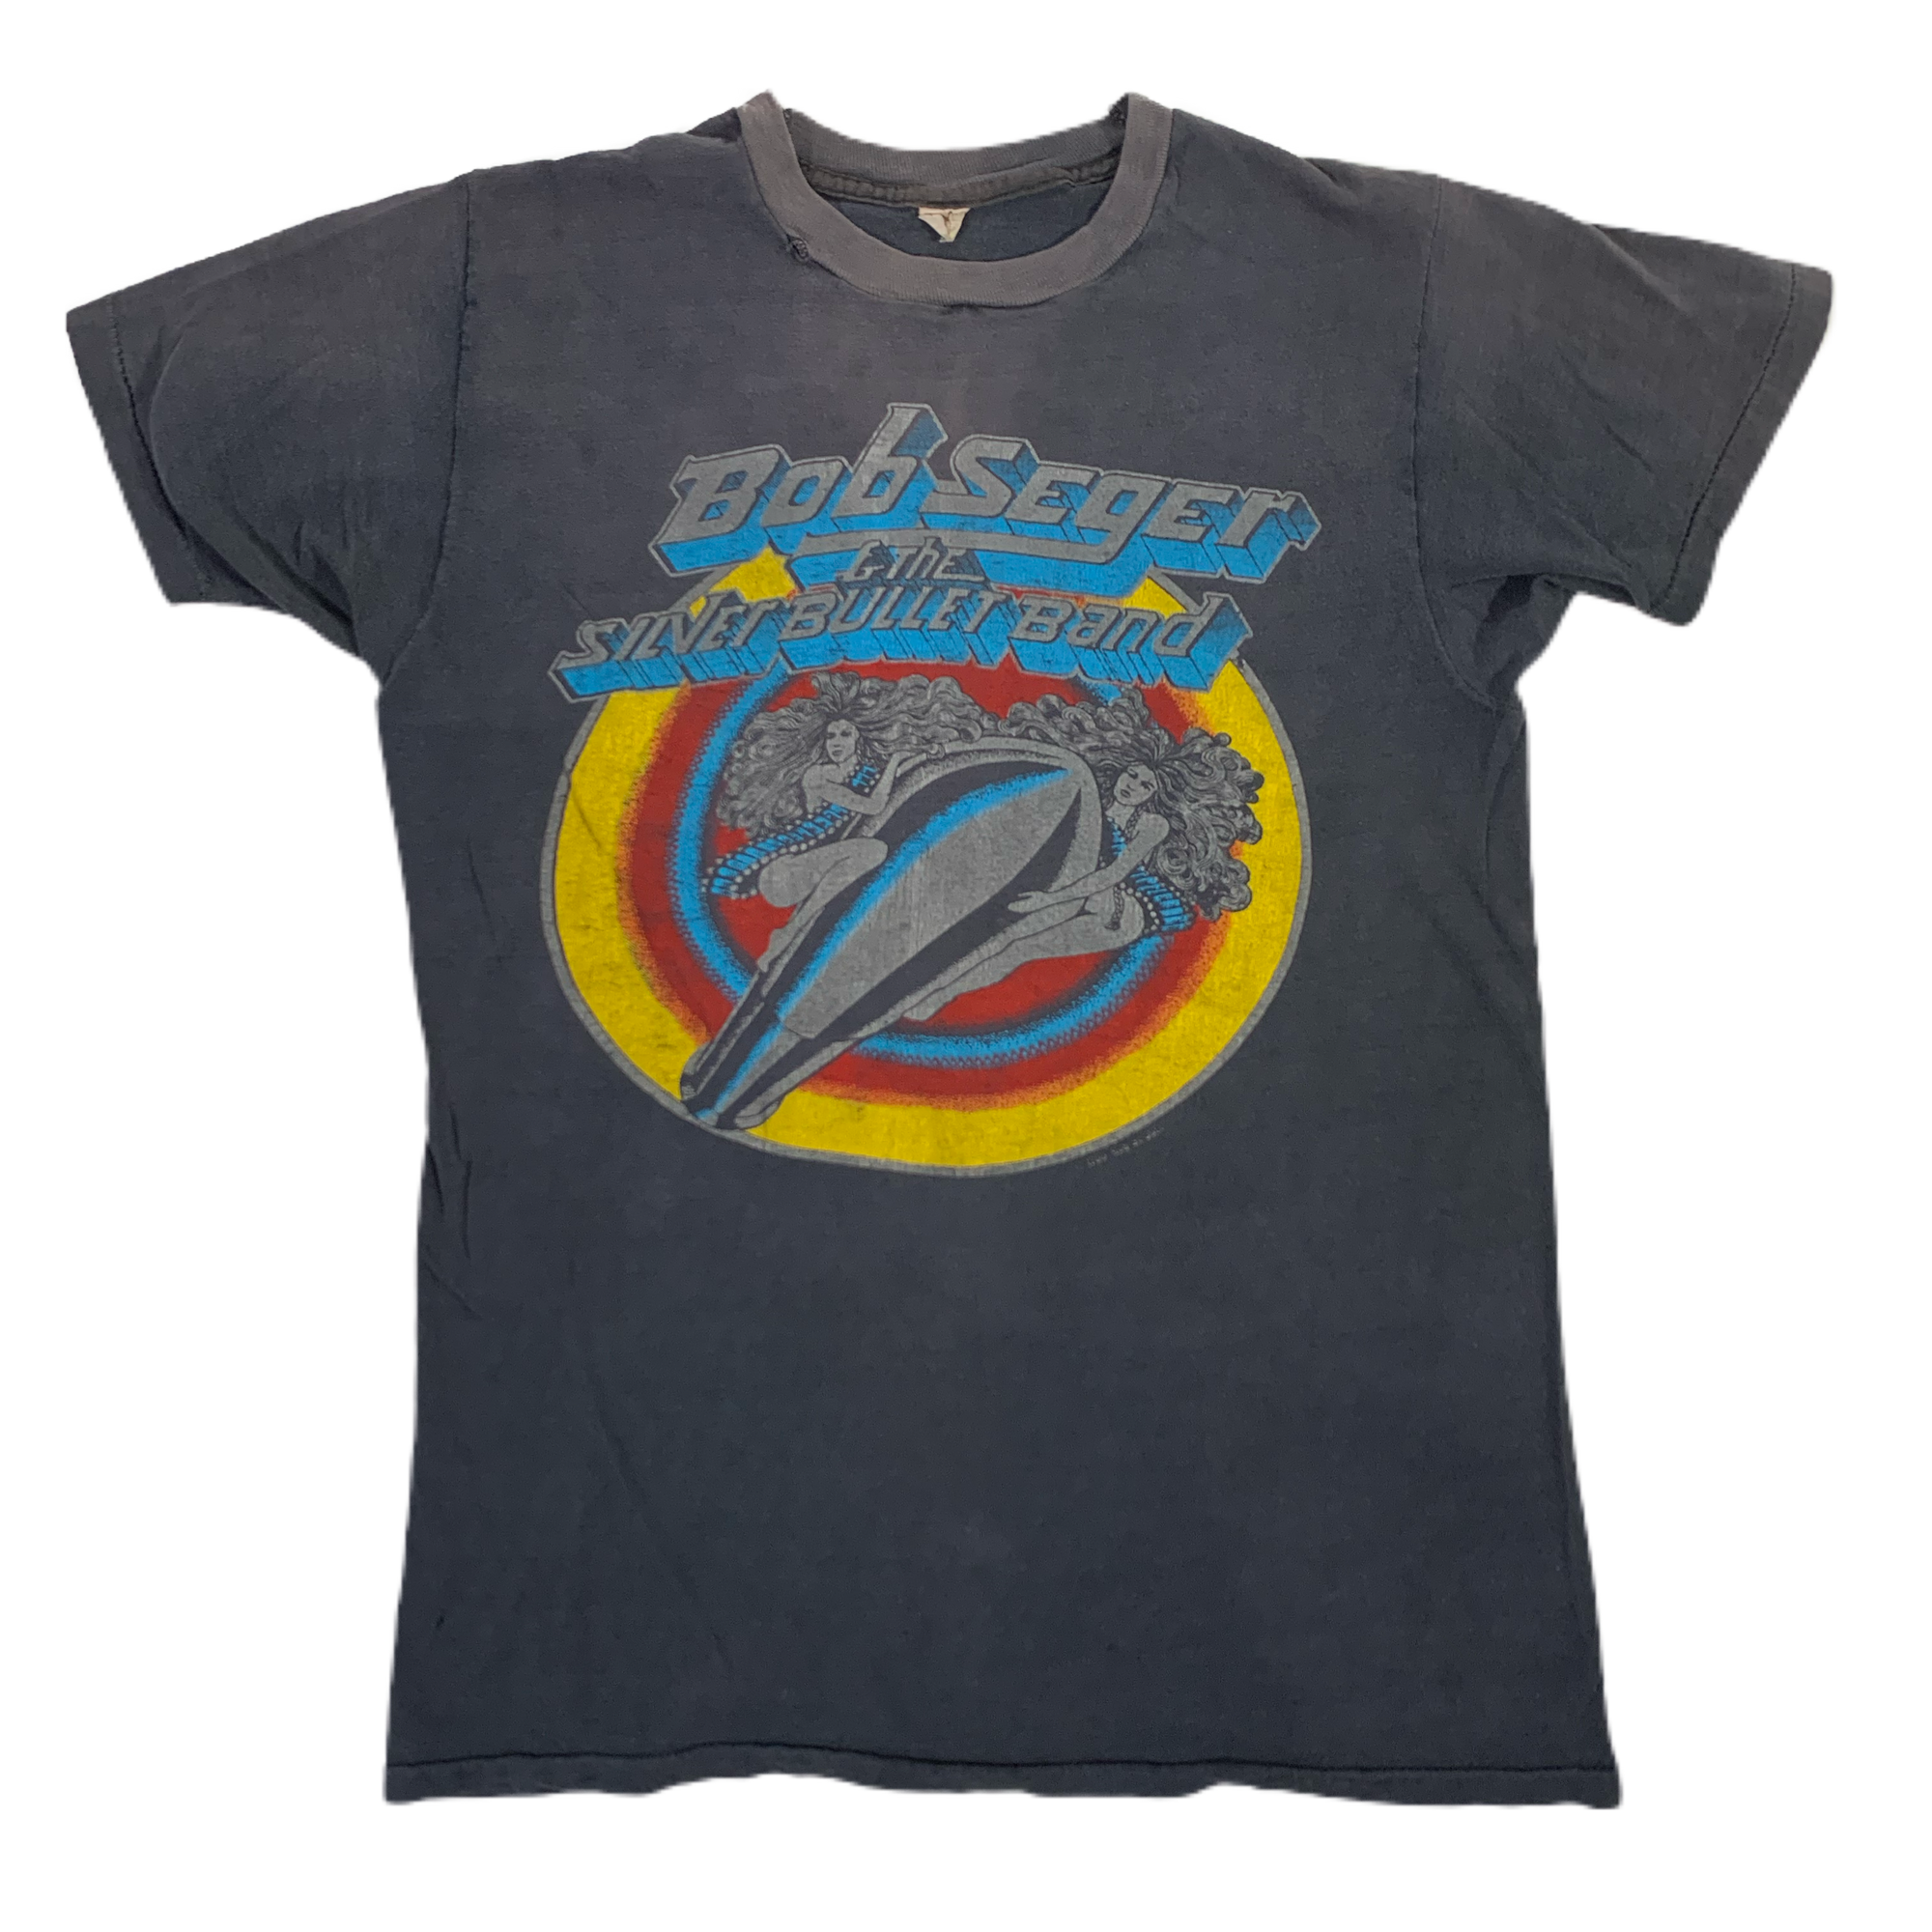 Vintage Bob Seger & The Silver Buller Band “Touring Against The Wind” T-Shirt - jointcustodydc